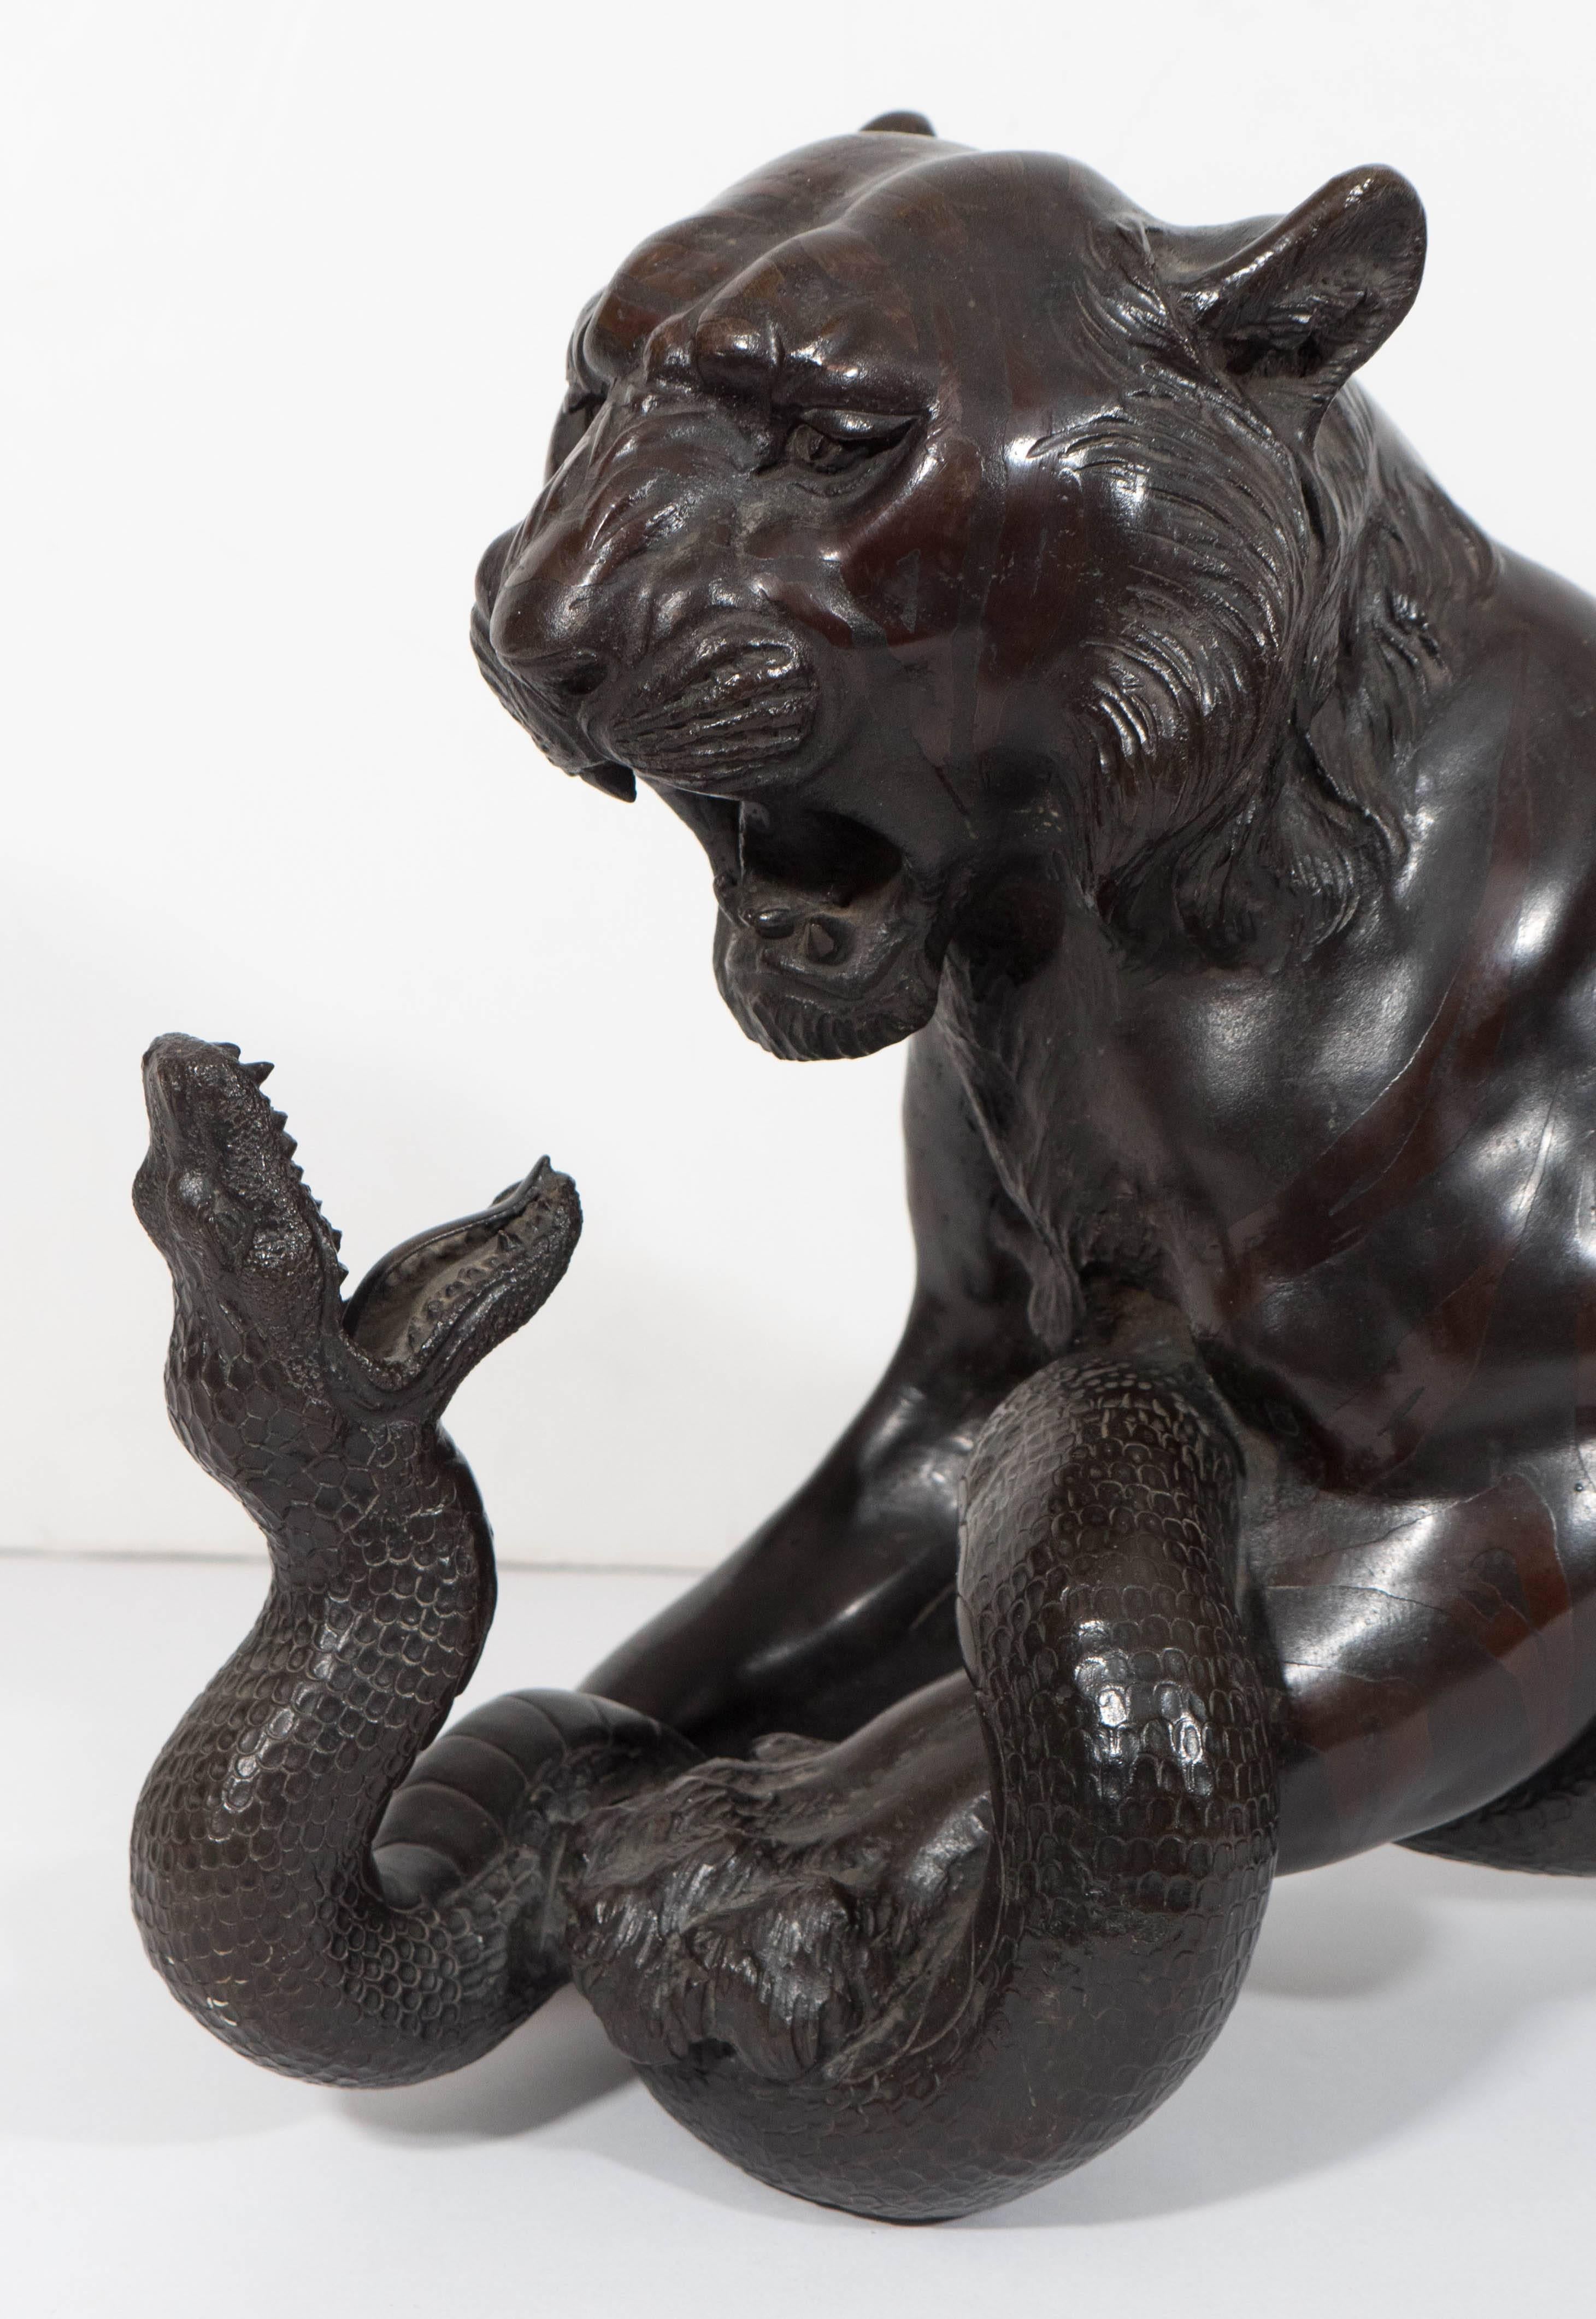 This patinated bronze sculpture, produced in Japan, circa Meiji period, depicts a ferocious tiger and serpent, engaged in deadly combat. The beasts are painstakingly detailed, acid etching stripes applied to the tiger, the snake scales visible along